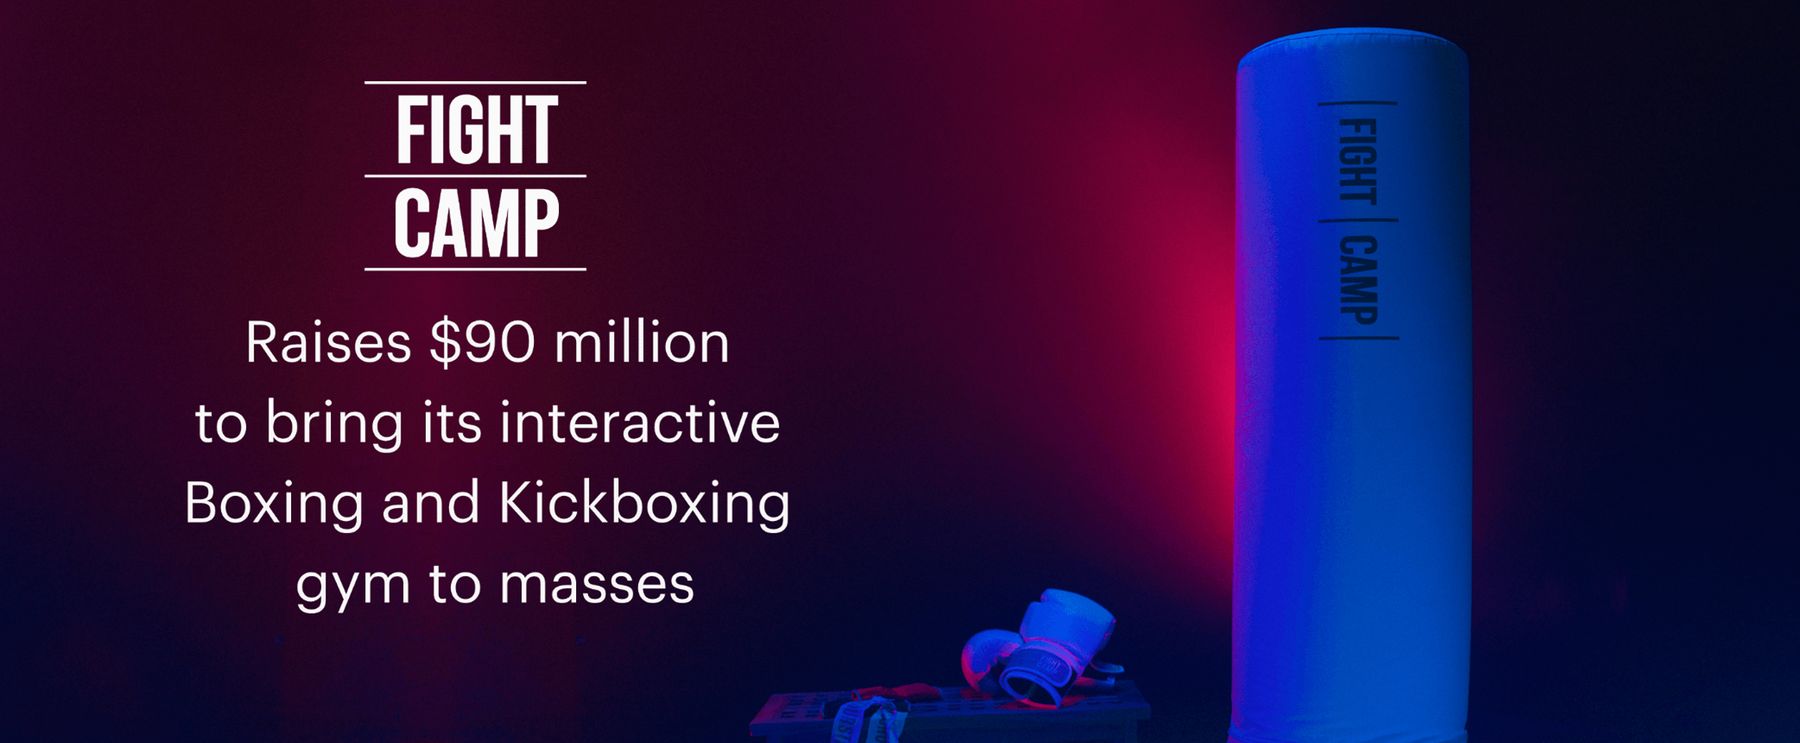 FightCamp Raises $90M To Bring Interactive Boxing Gym To All